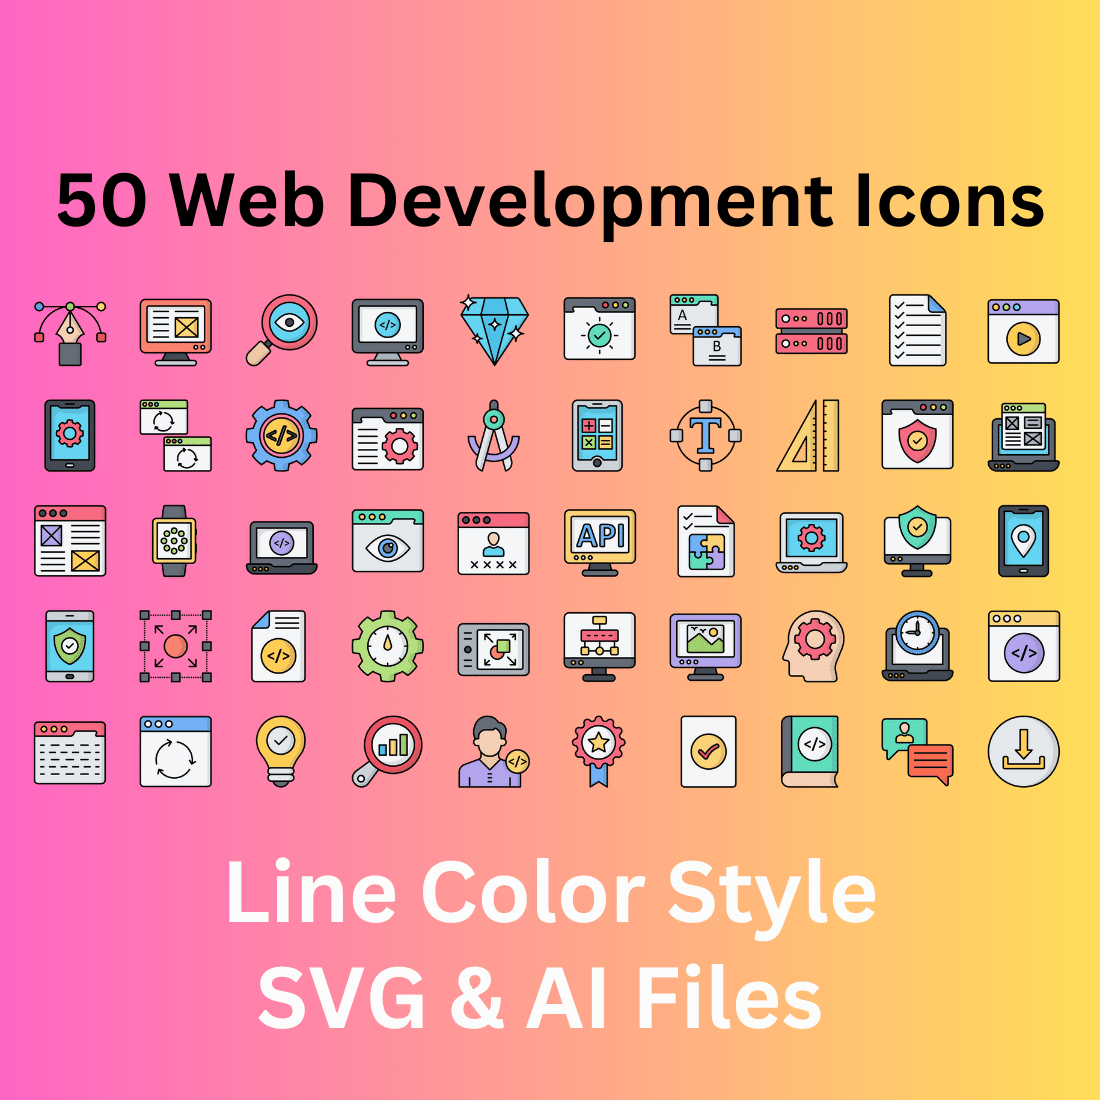 Web Development Icon Set 50 Line Color Icons - SVG And AI Files cover image.